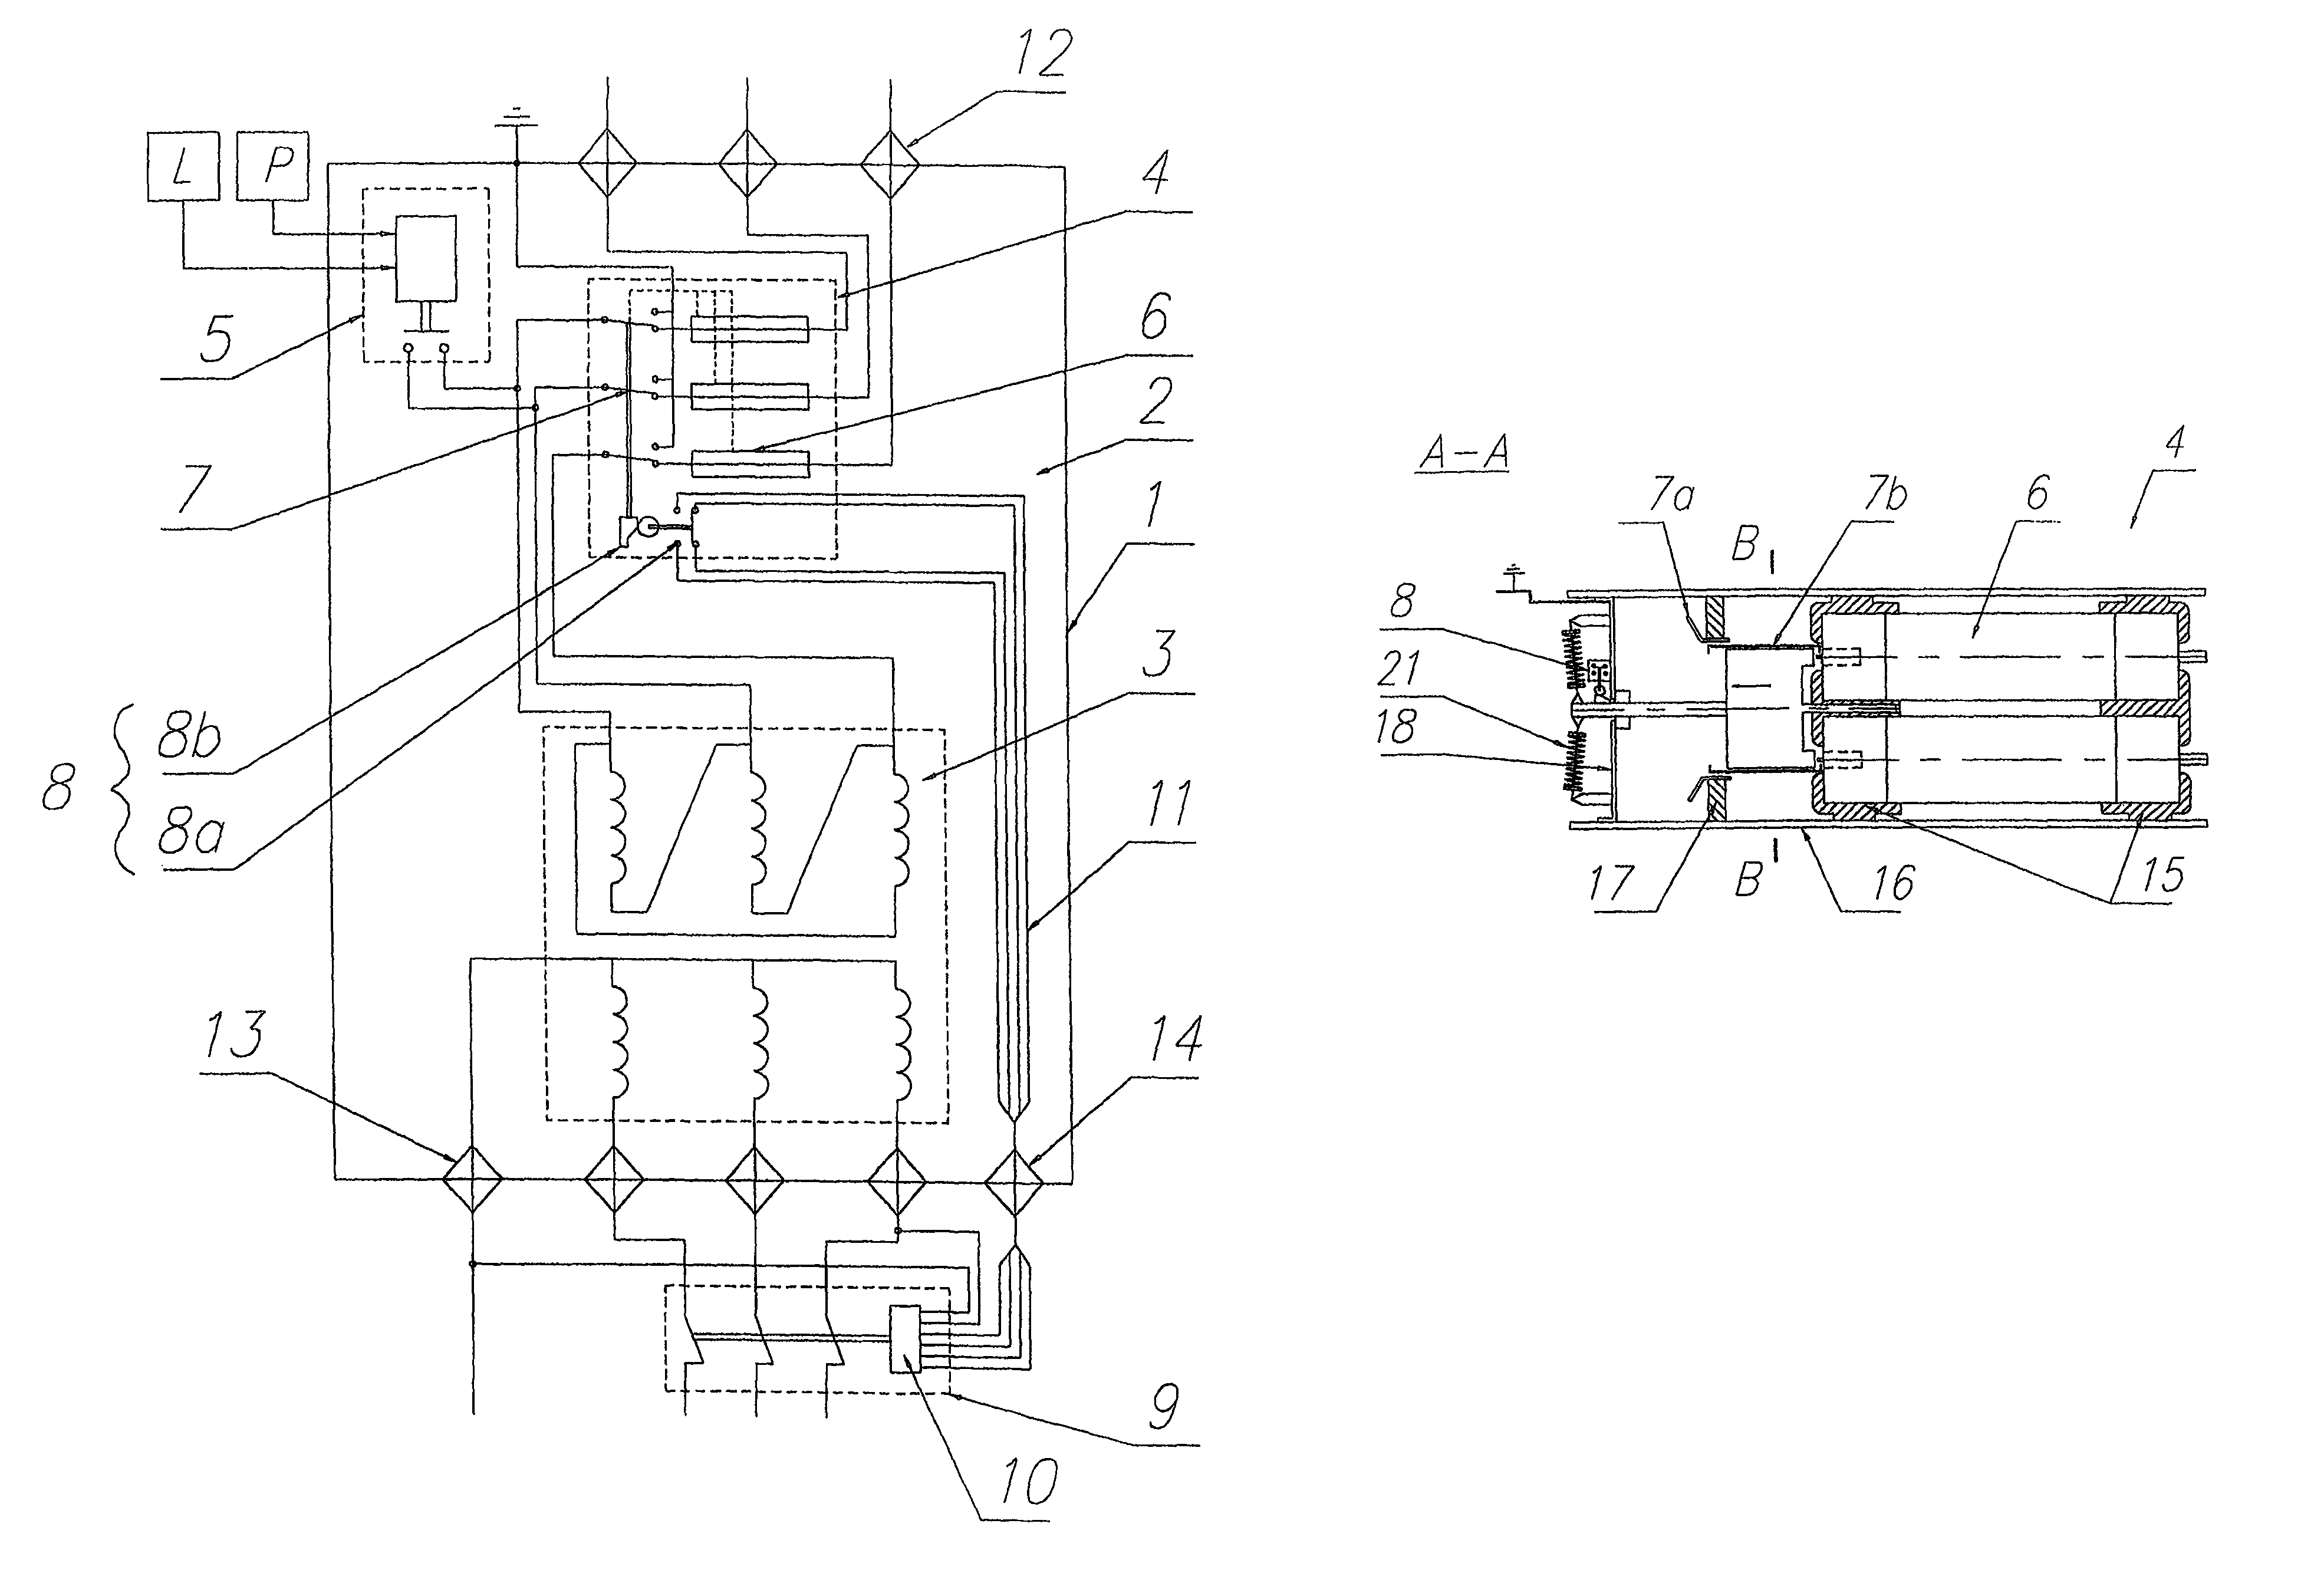 Disconnector for distribution transformers with dielectric liquid